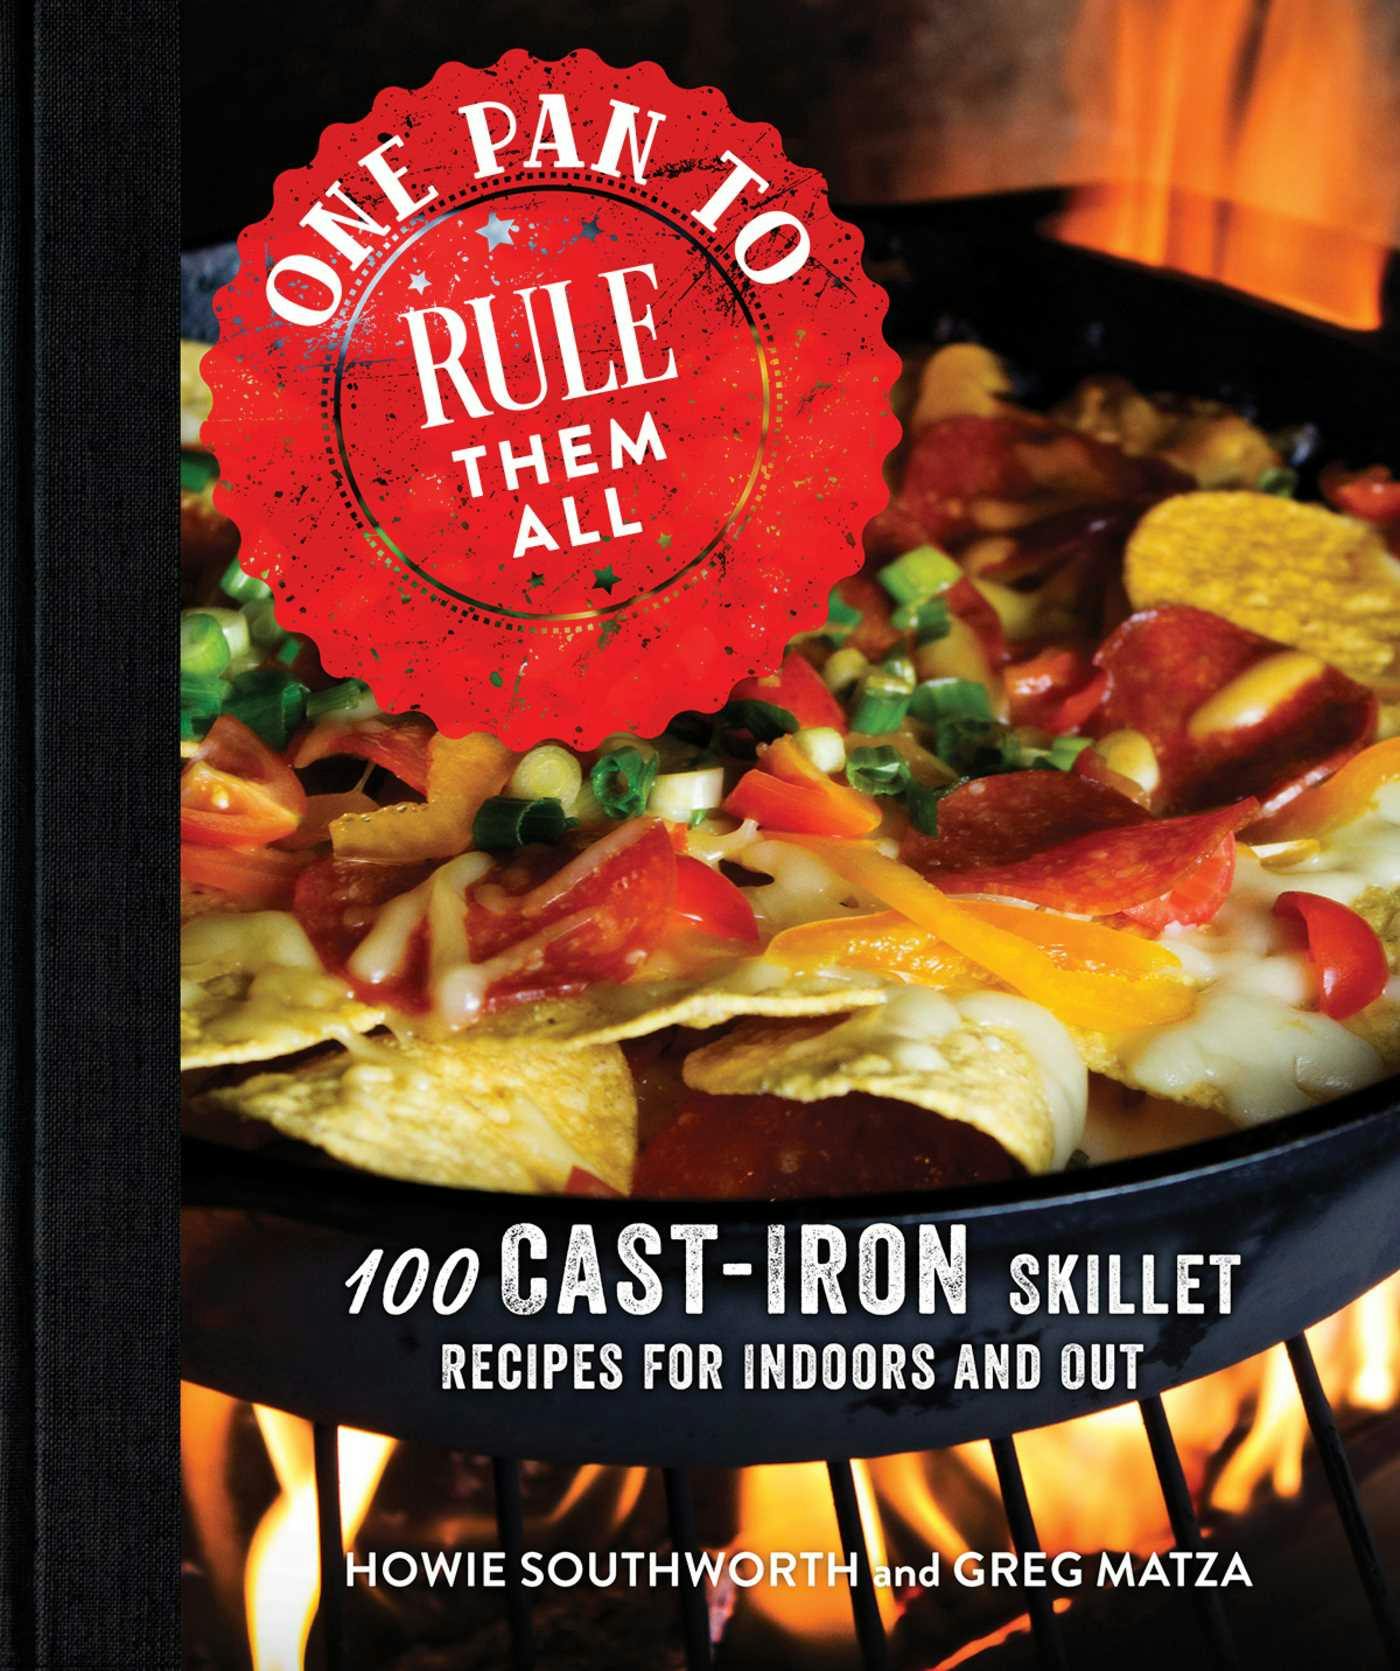 One Pan to Rule Them All: 100 Cast-Iron Skillet Recipes for Indoors and Out - Greg Matza, Howie Southworth